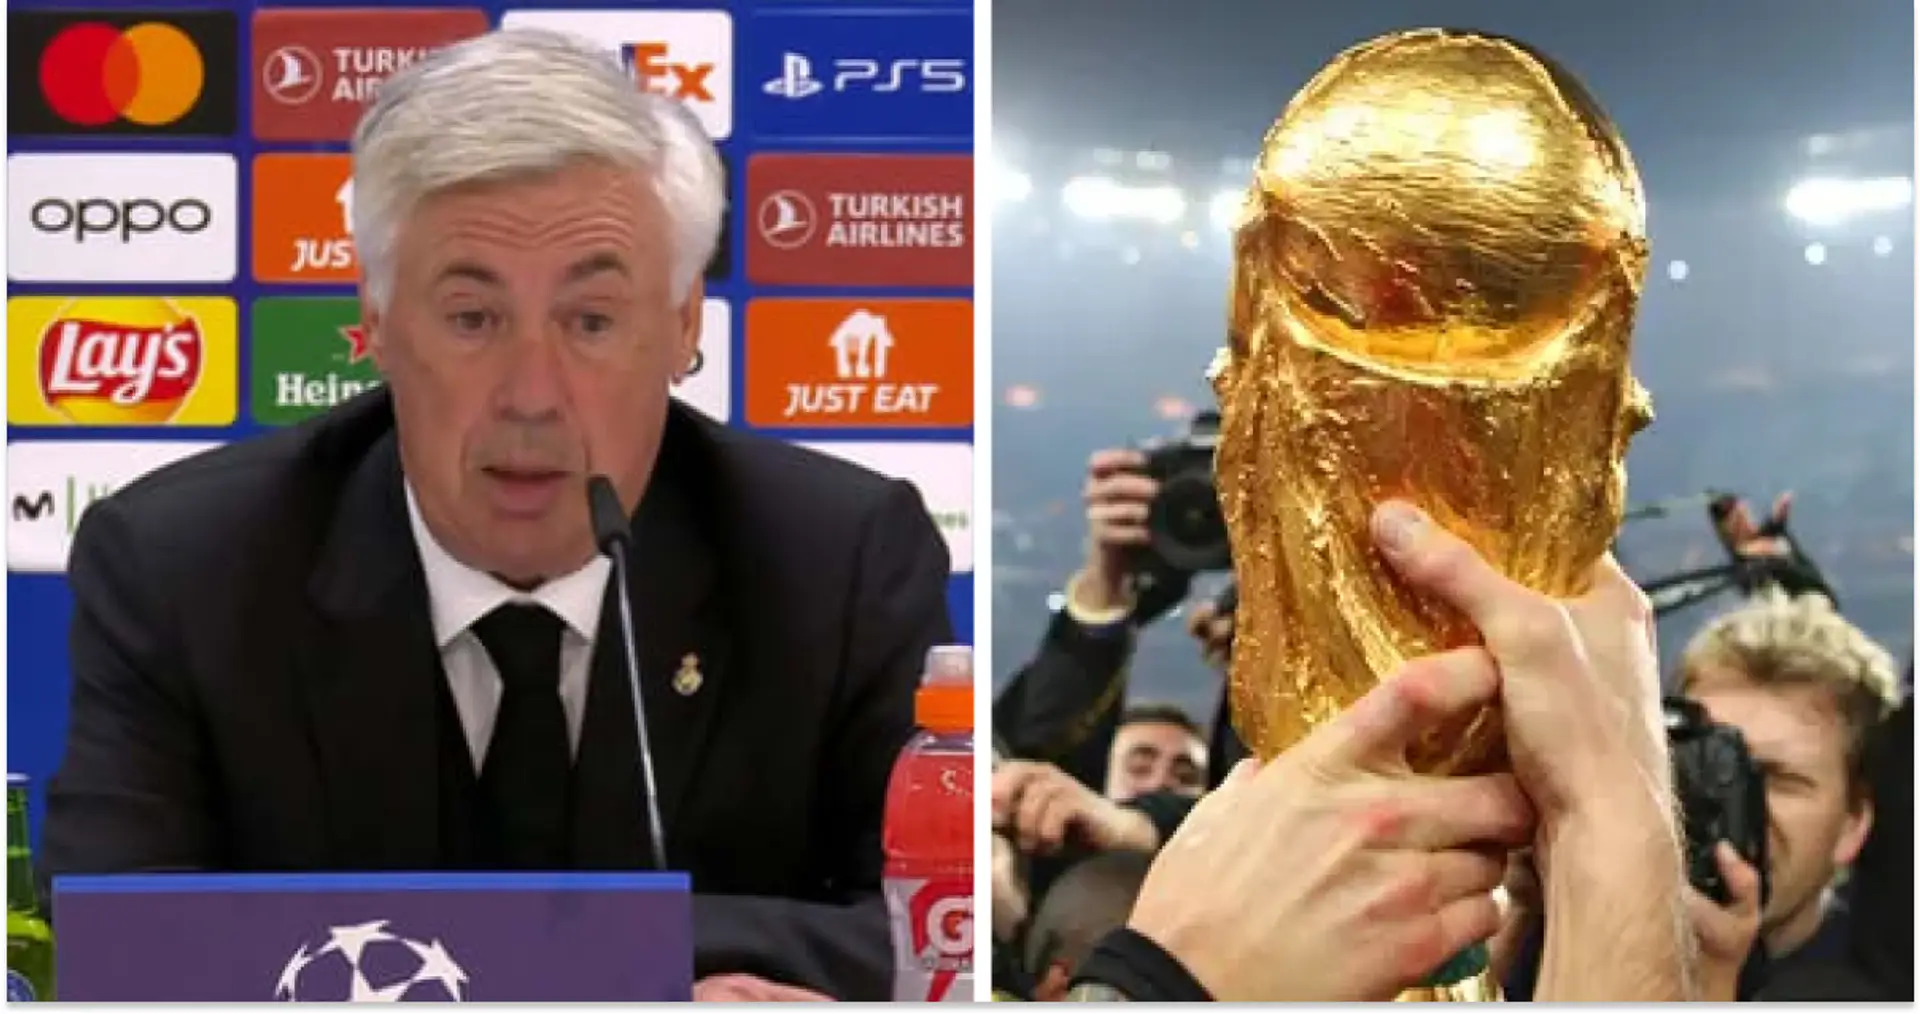 Ancelotti reveals what country he chose to support at World Cup -- you'd never guess